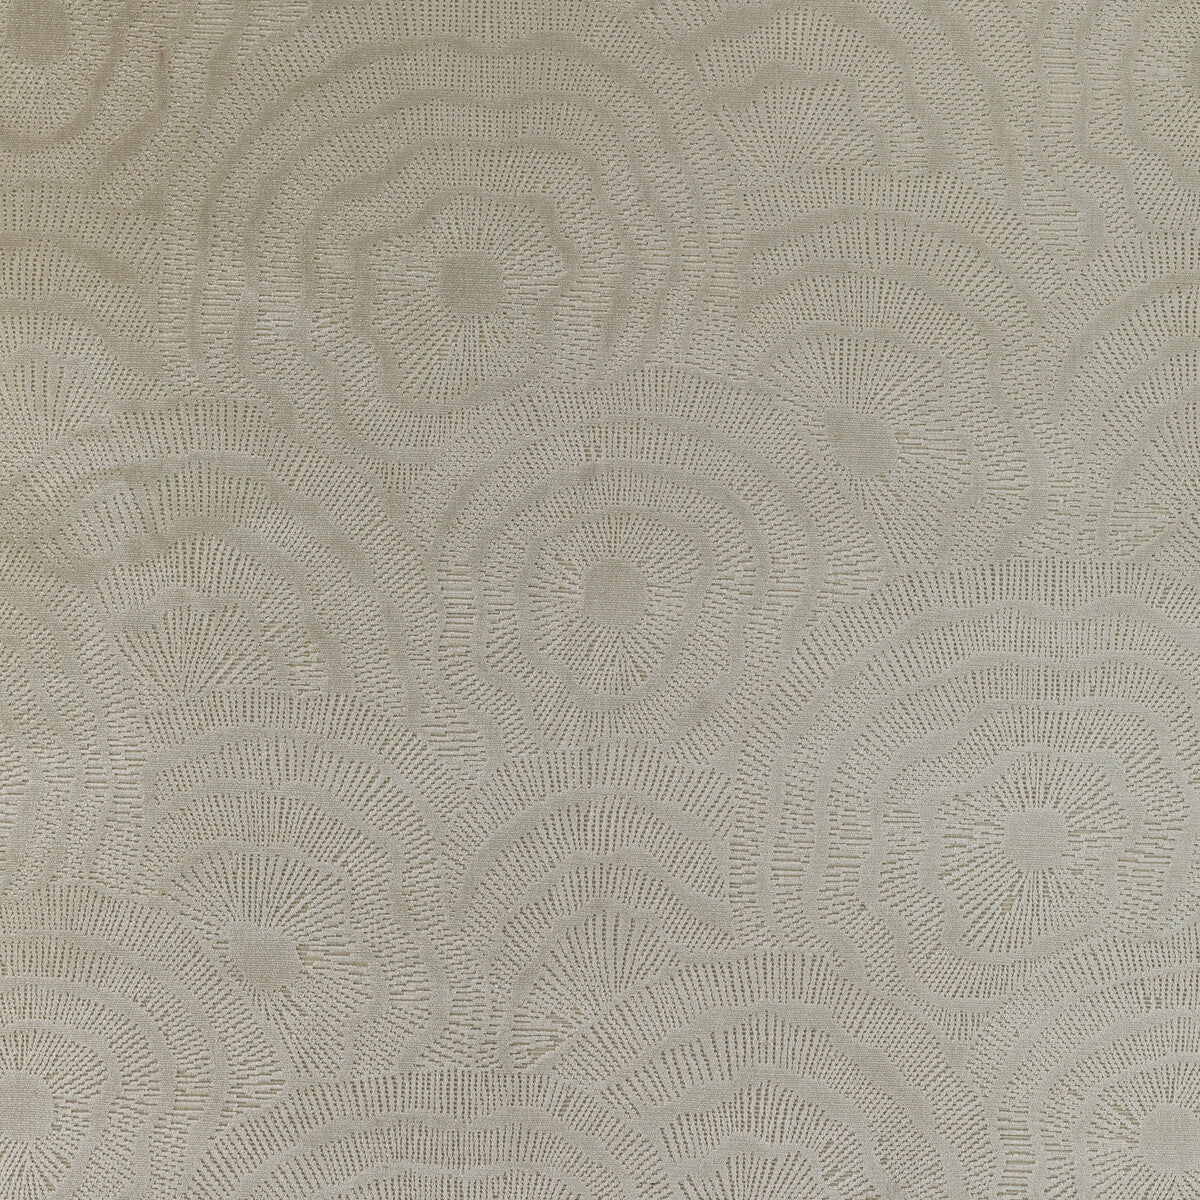 Panache Velvet fabric in sand color - pattern 36366.106.0 - by Kravet Couture in the Corey Damen Jenkins Trad Nouveau collection